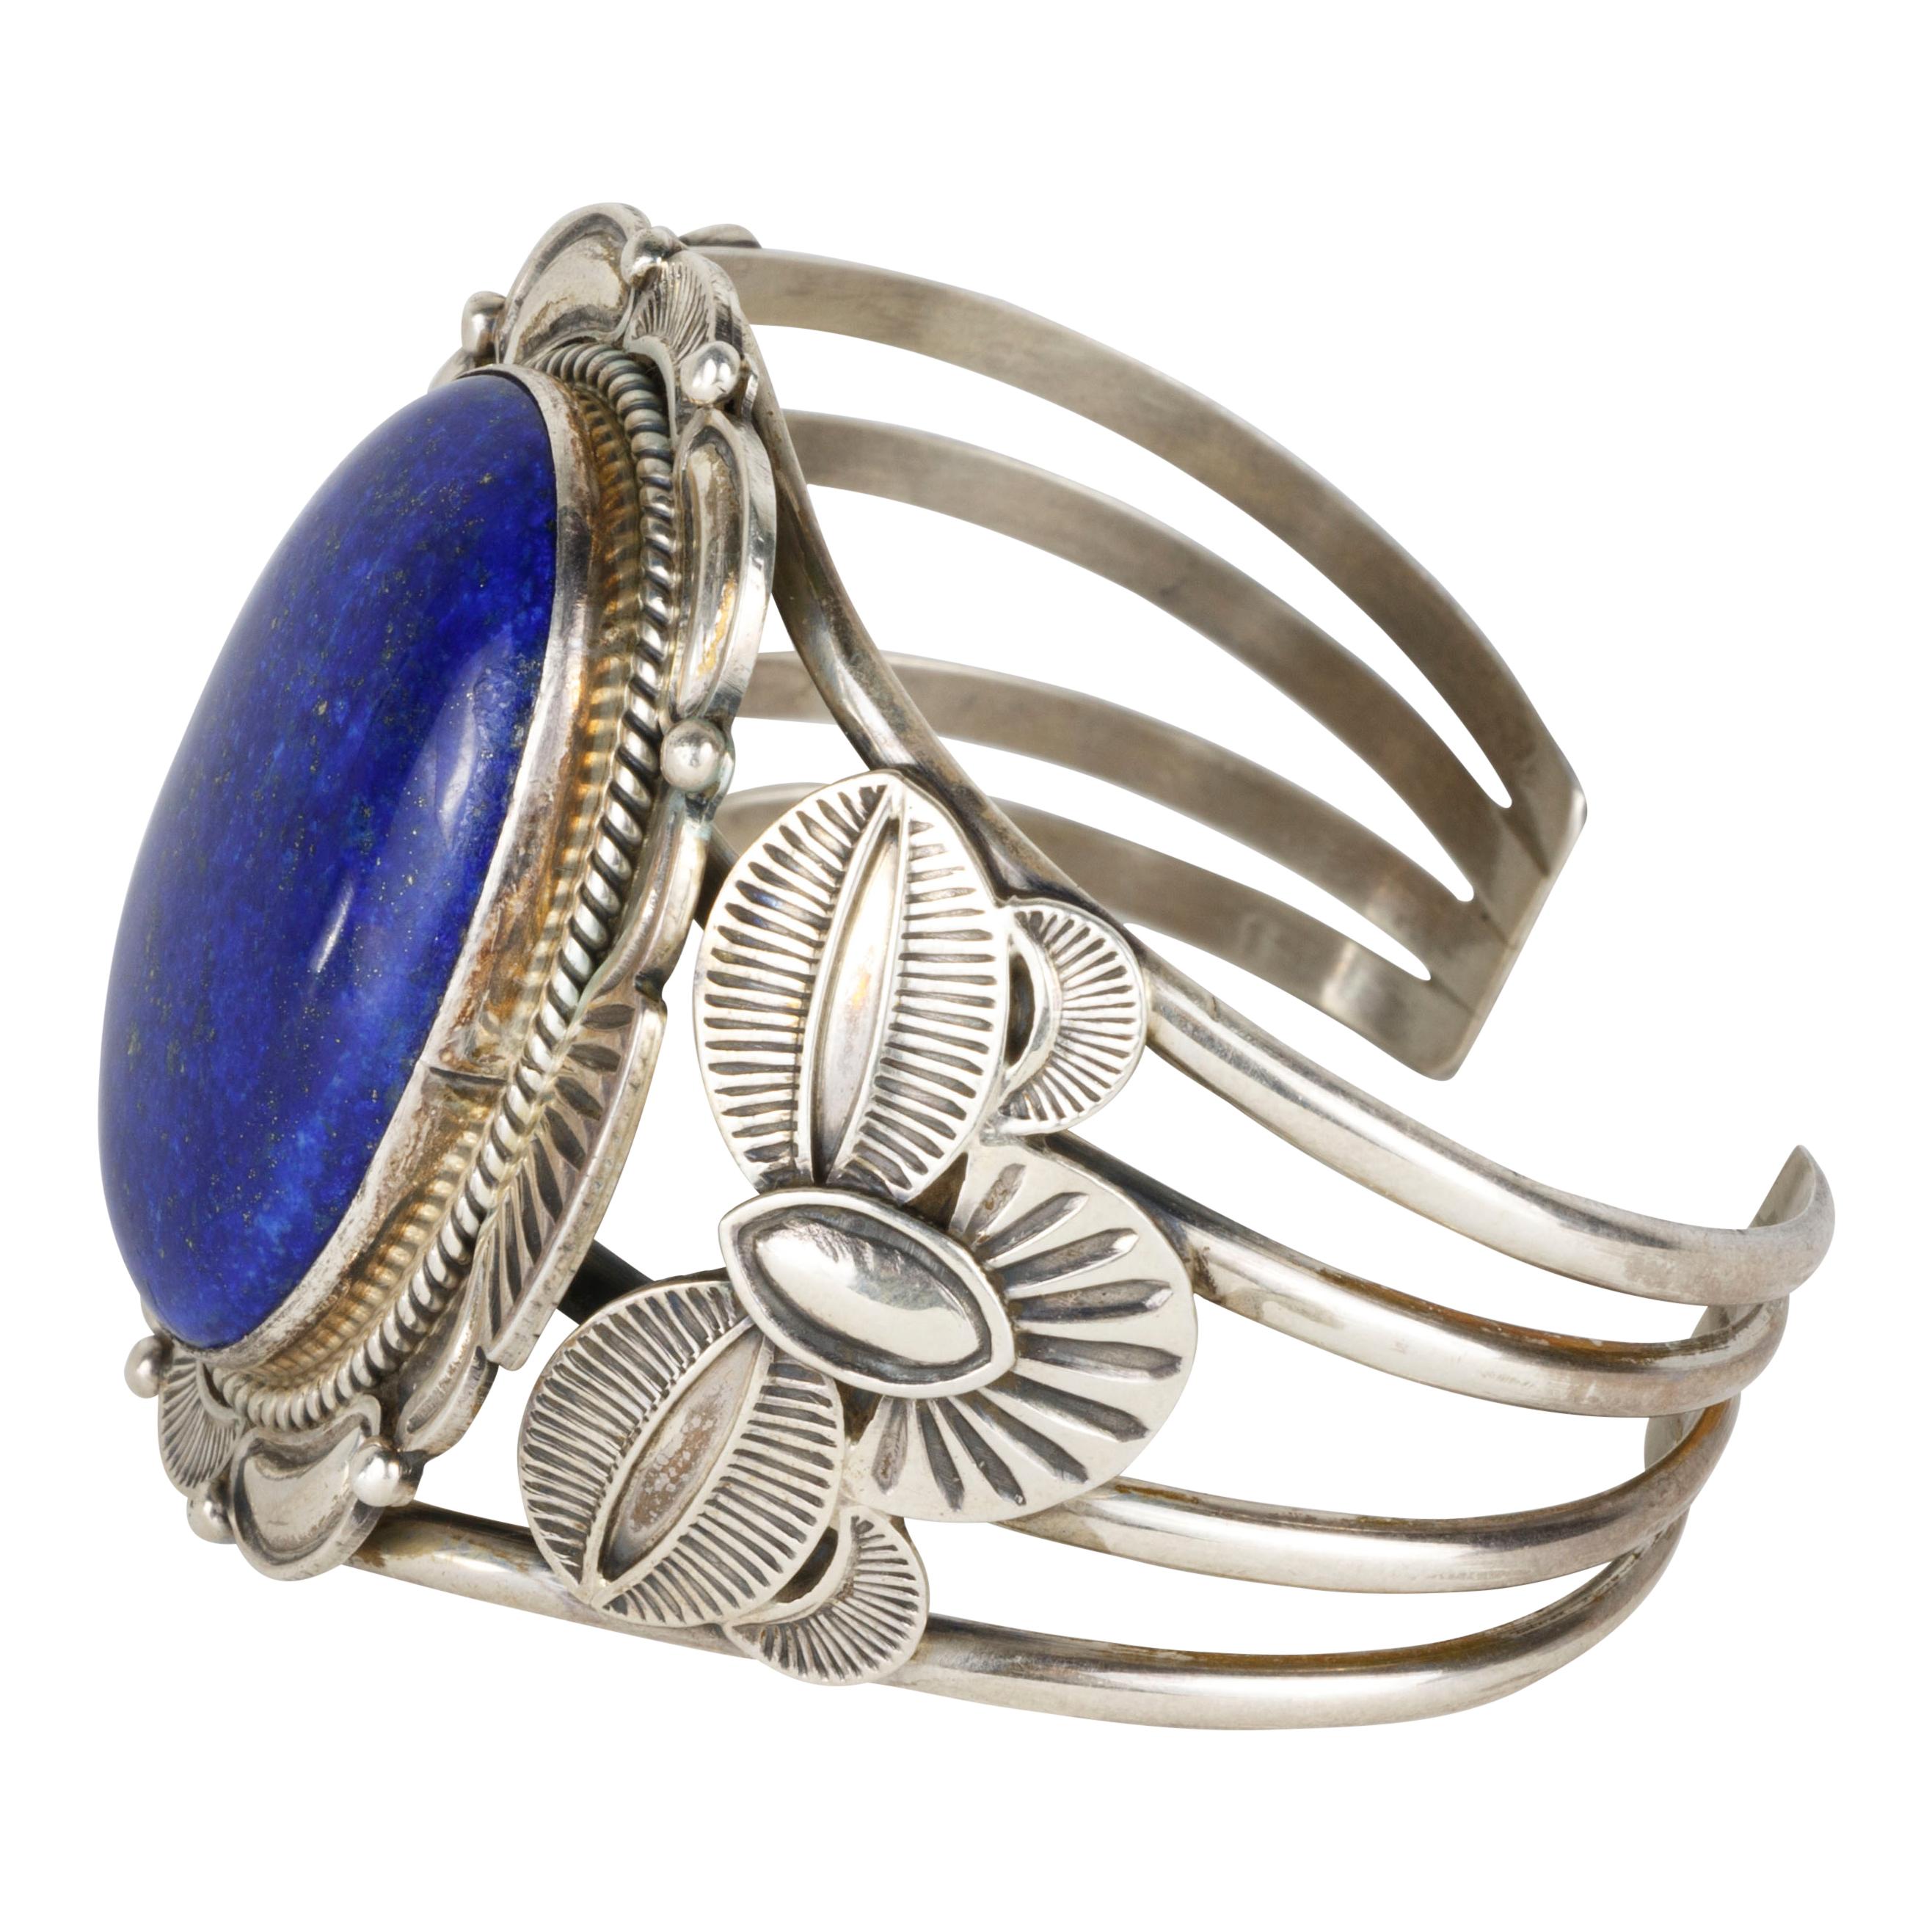 Beautiful Navajo lapis bracelet with silver leaf design and large lapis center stone. Maker marked M. Spencer. Marked sterling silver. Excellent silver work!

PERIOD: After 1950
ORIGIN: Navajo, Southwest
SIZE: 7